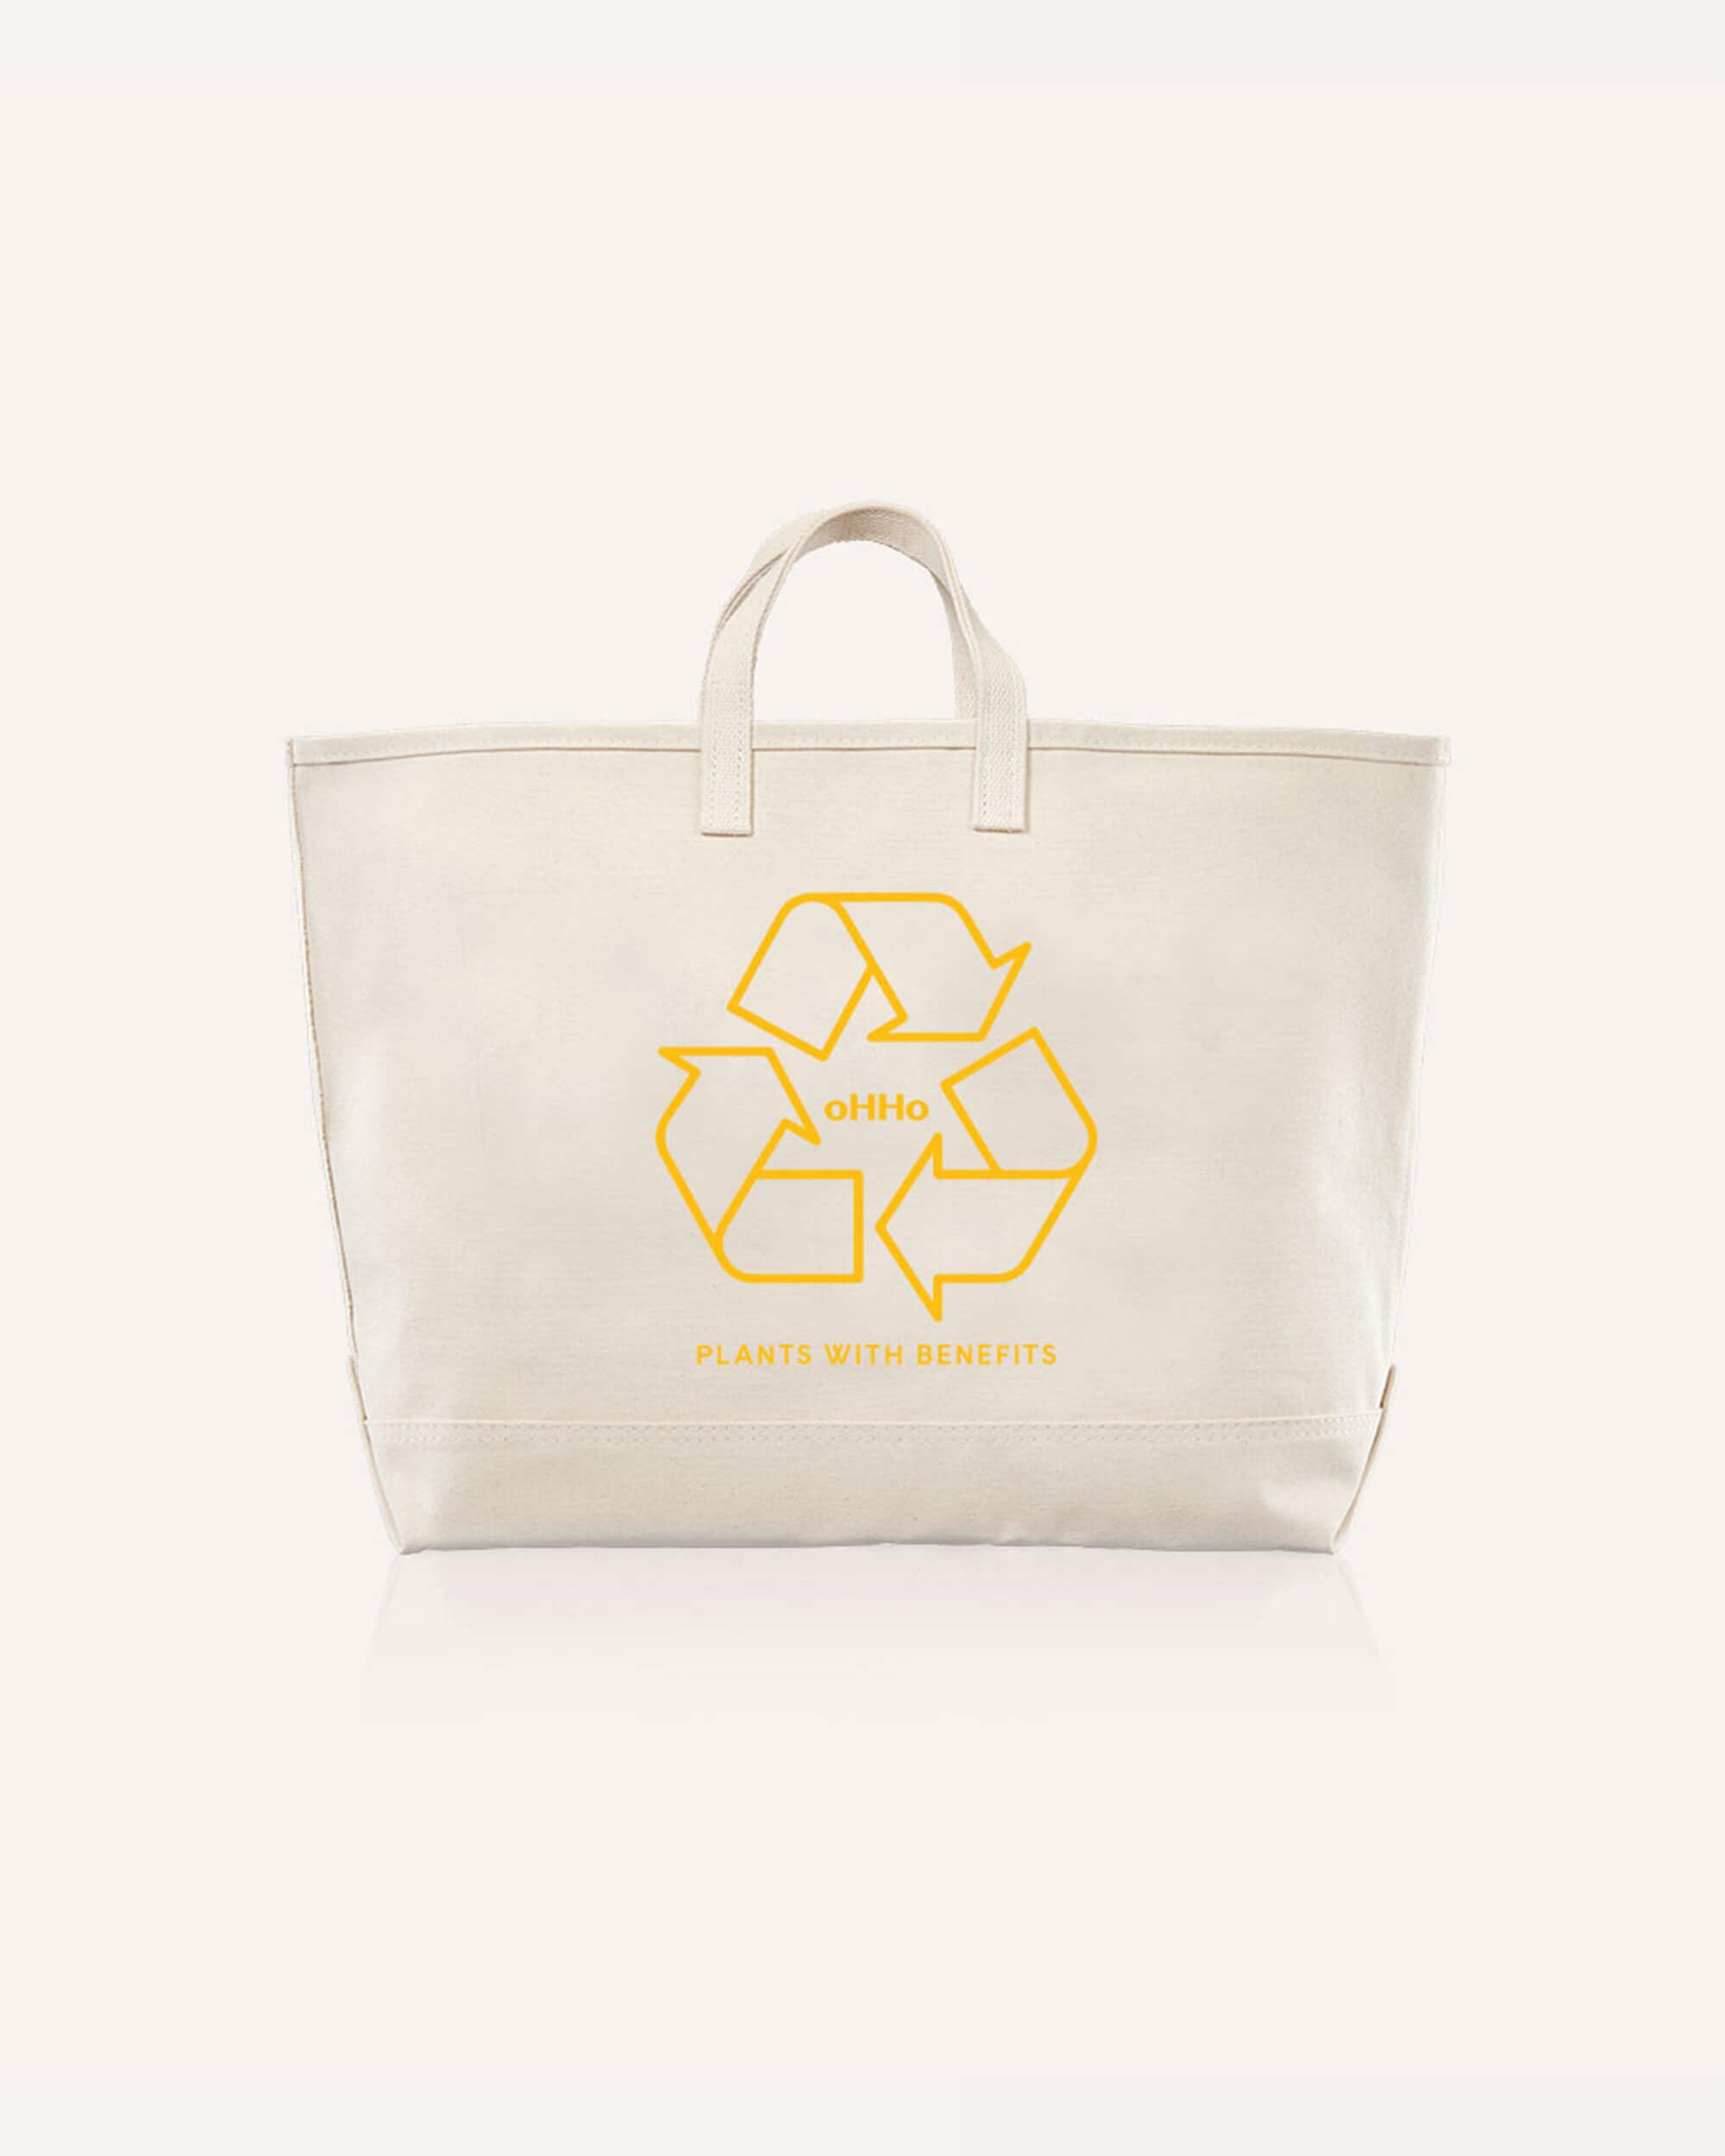 A canvas tote bag with oHHo logo on it in yellow back